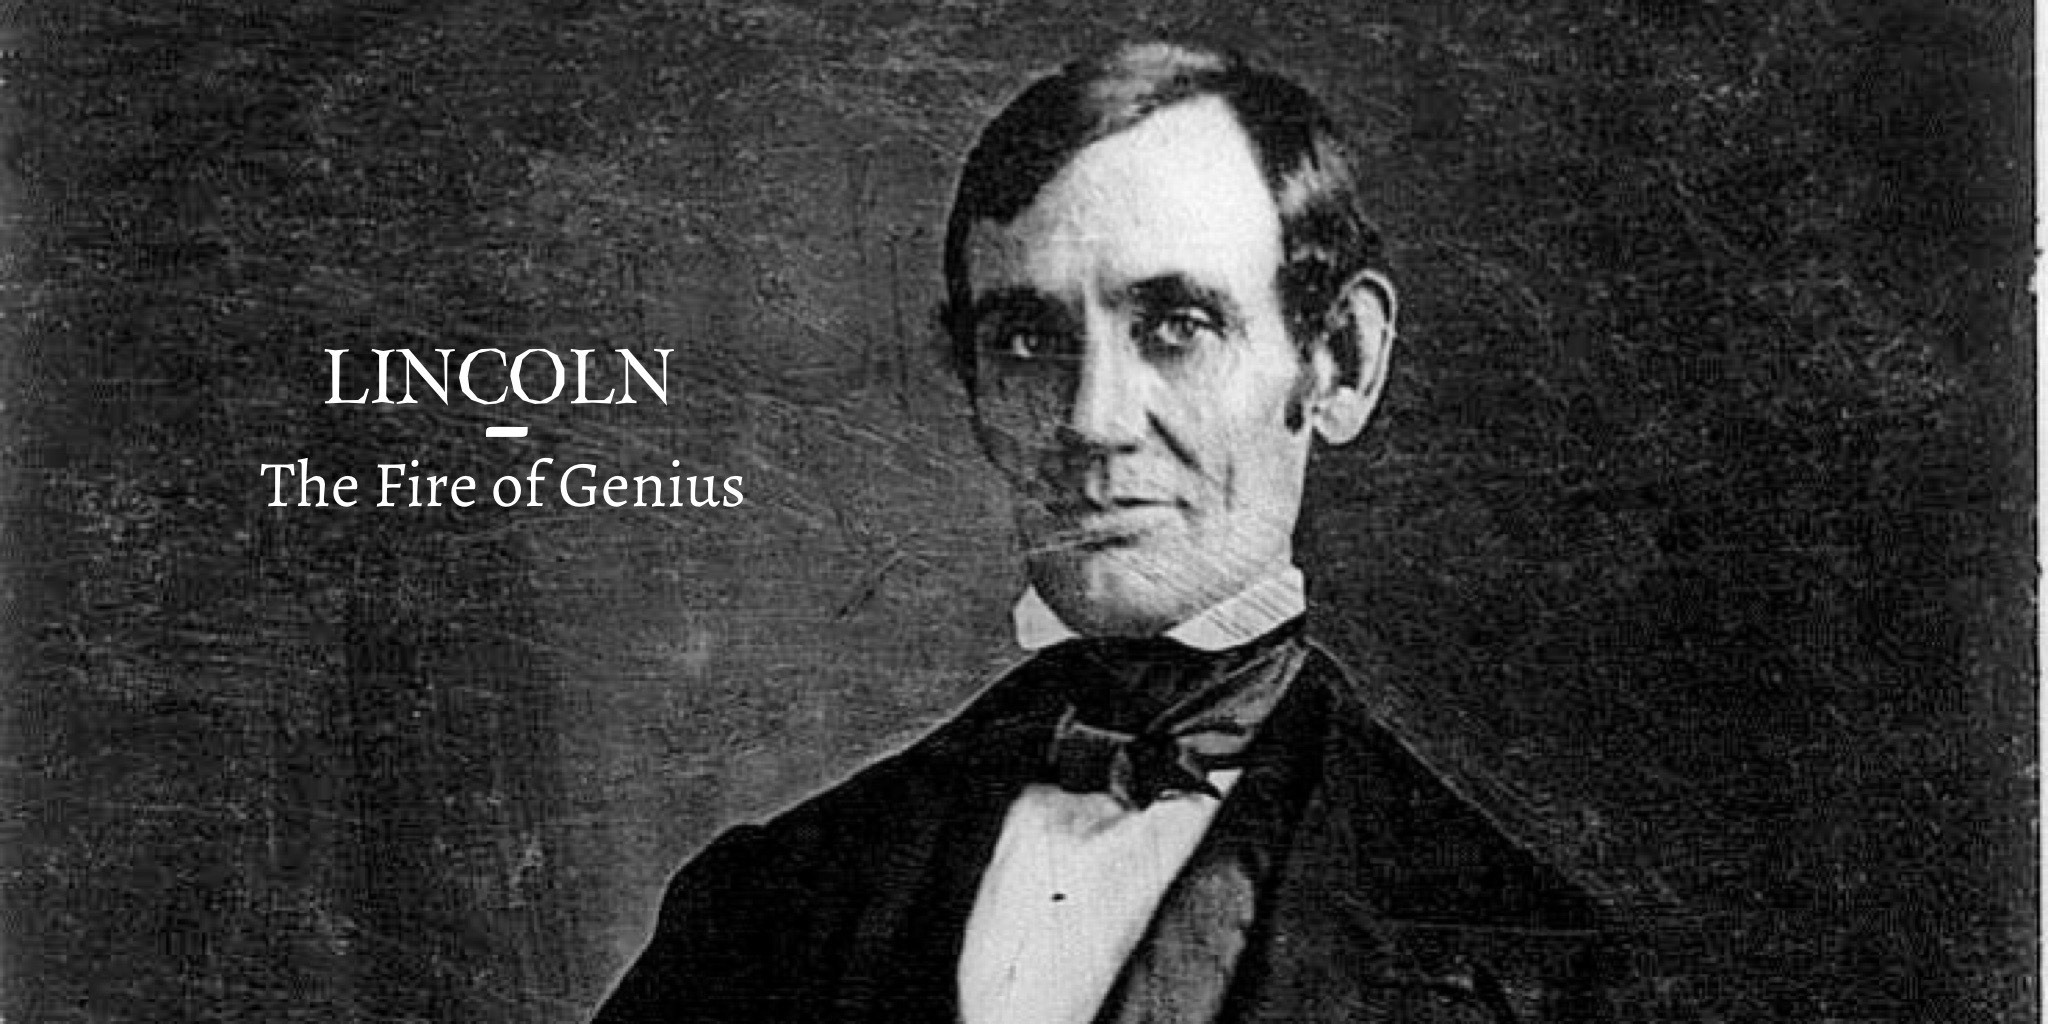 The Fire of Genius: How Lincoln Overcame Poverty and Gained an Education